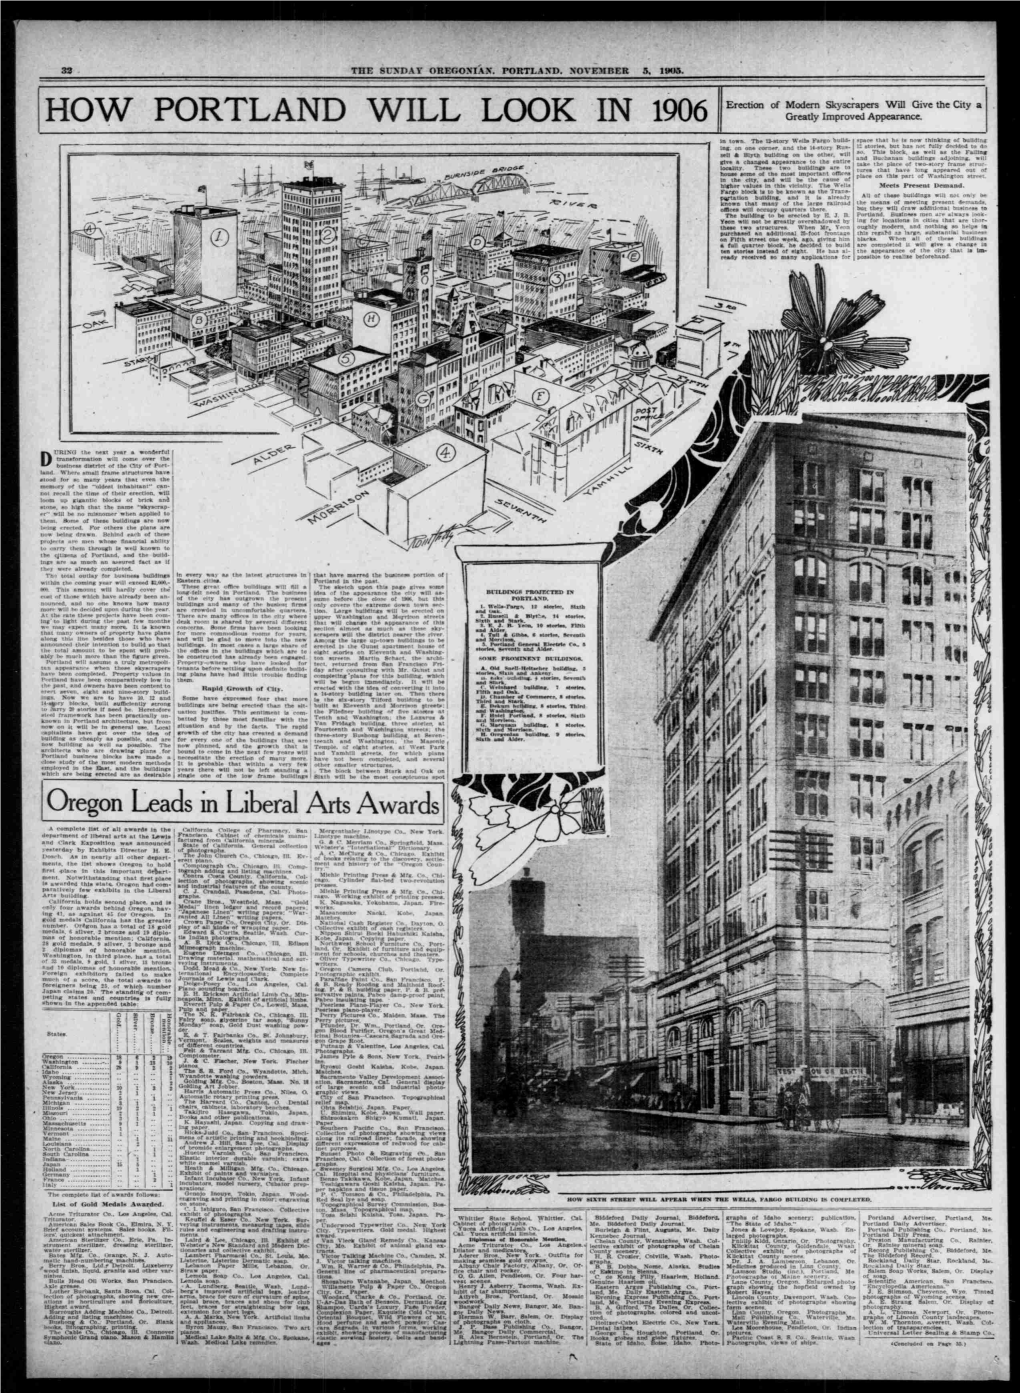 HOW PORTLAND WILL LOOK in 1906 E"Gonof Stg"Tt'cly-